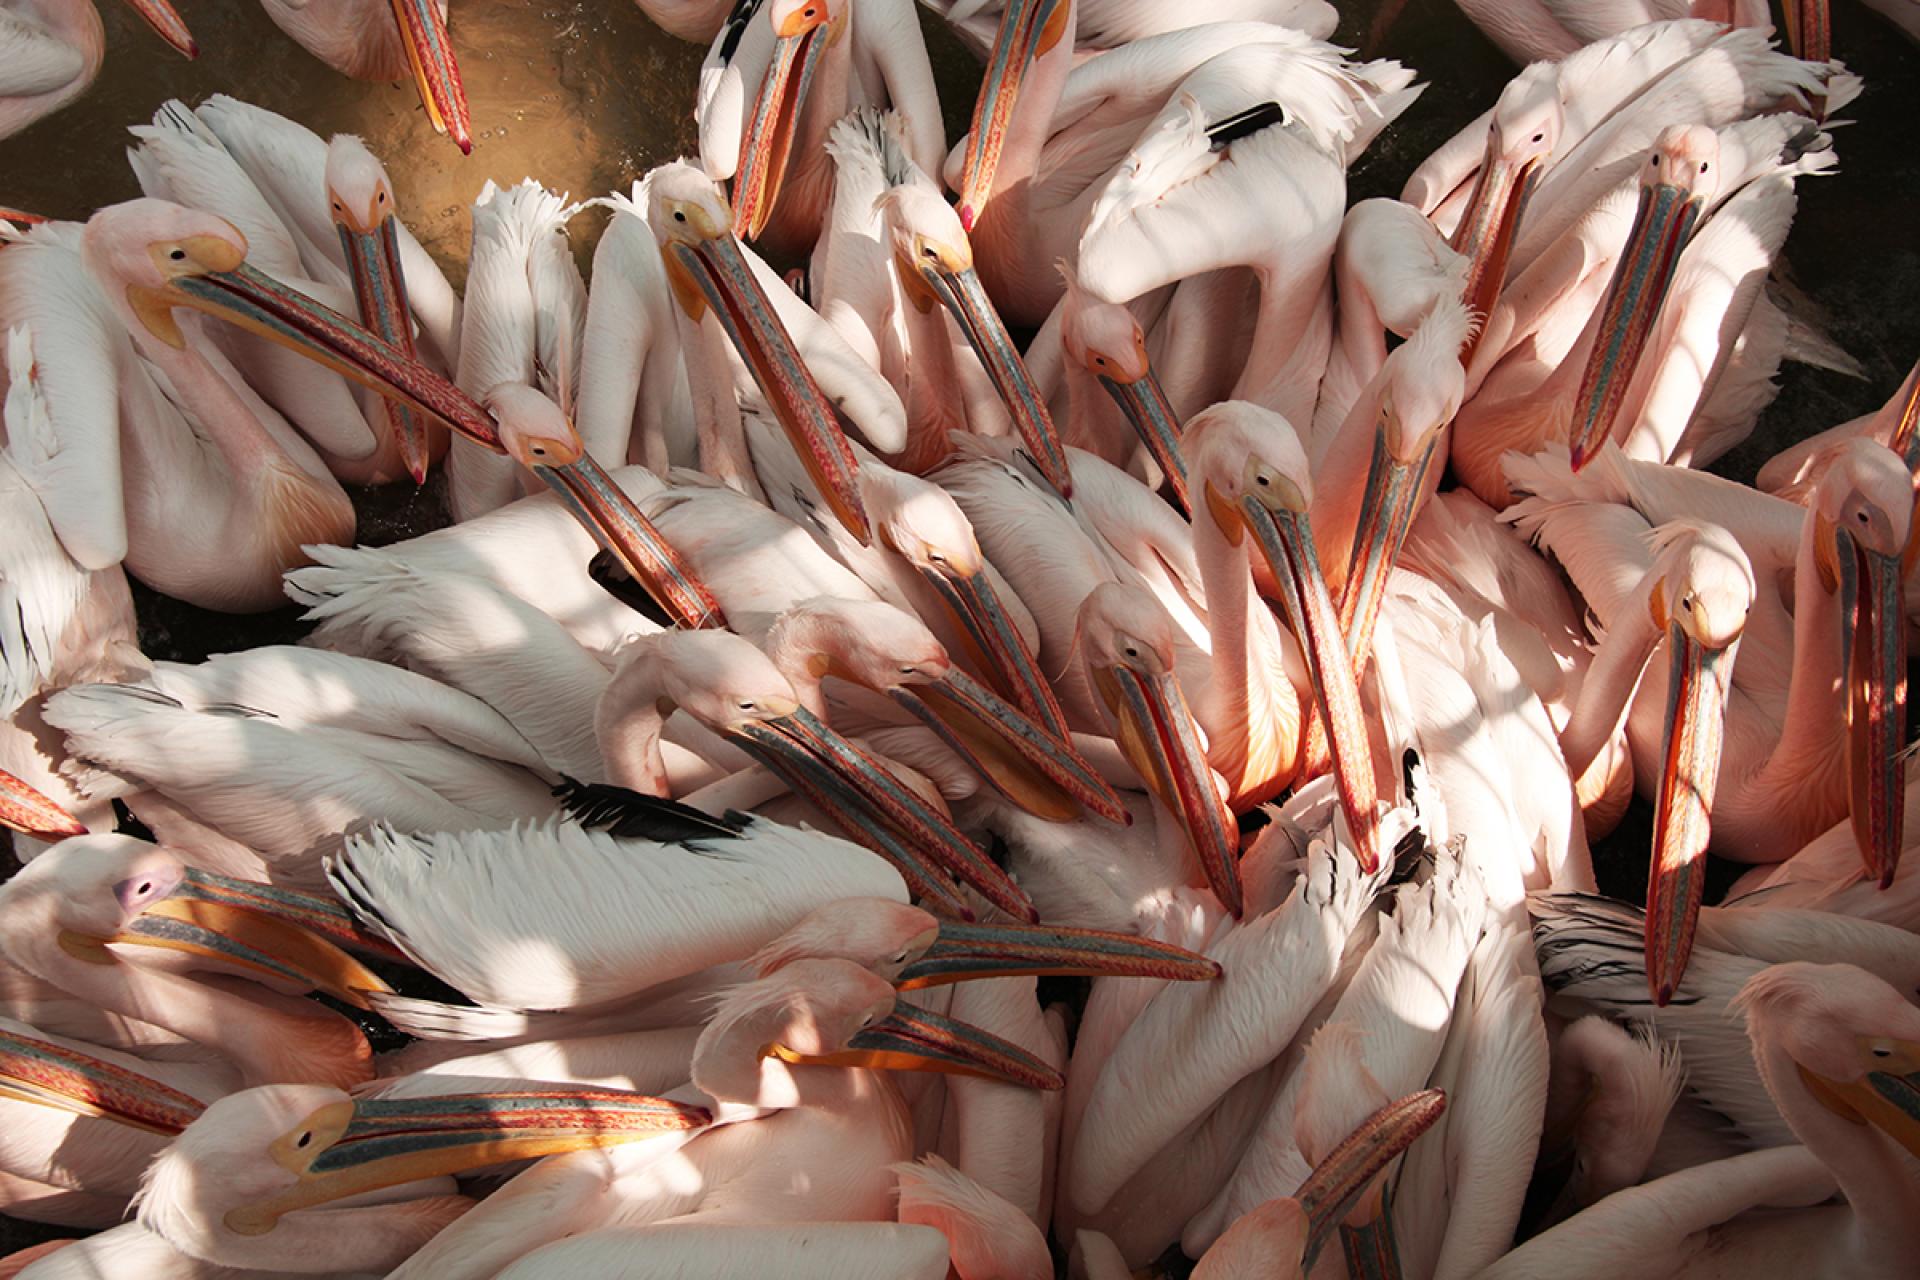 London Photography Awards Winner - Hungry Pelicans 